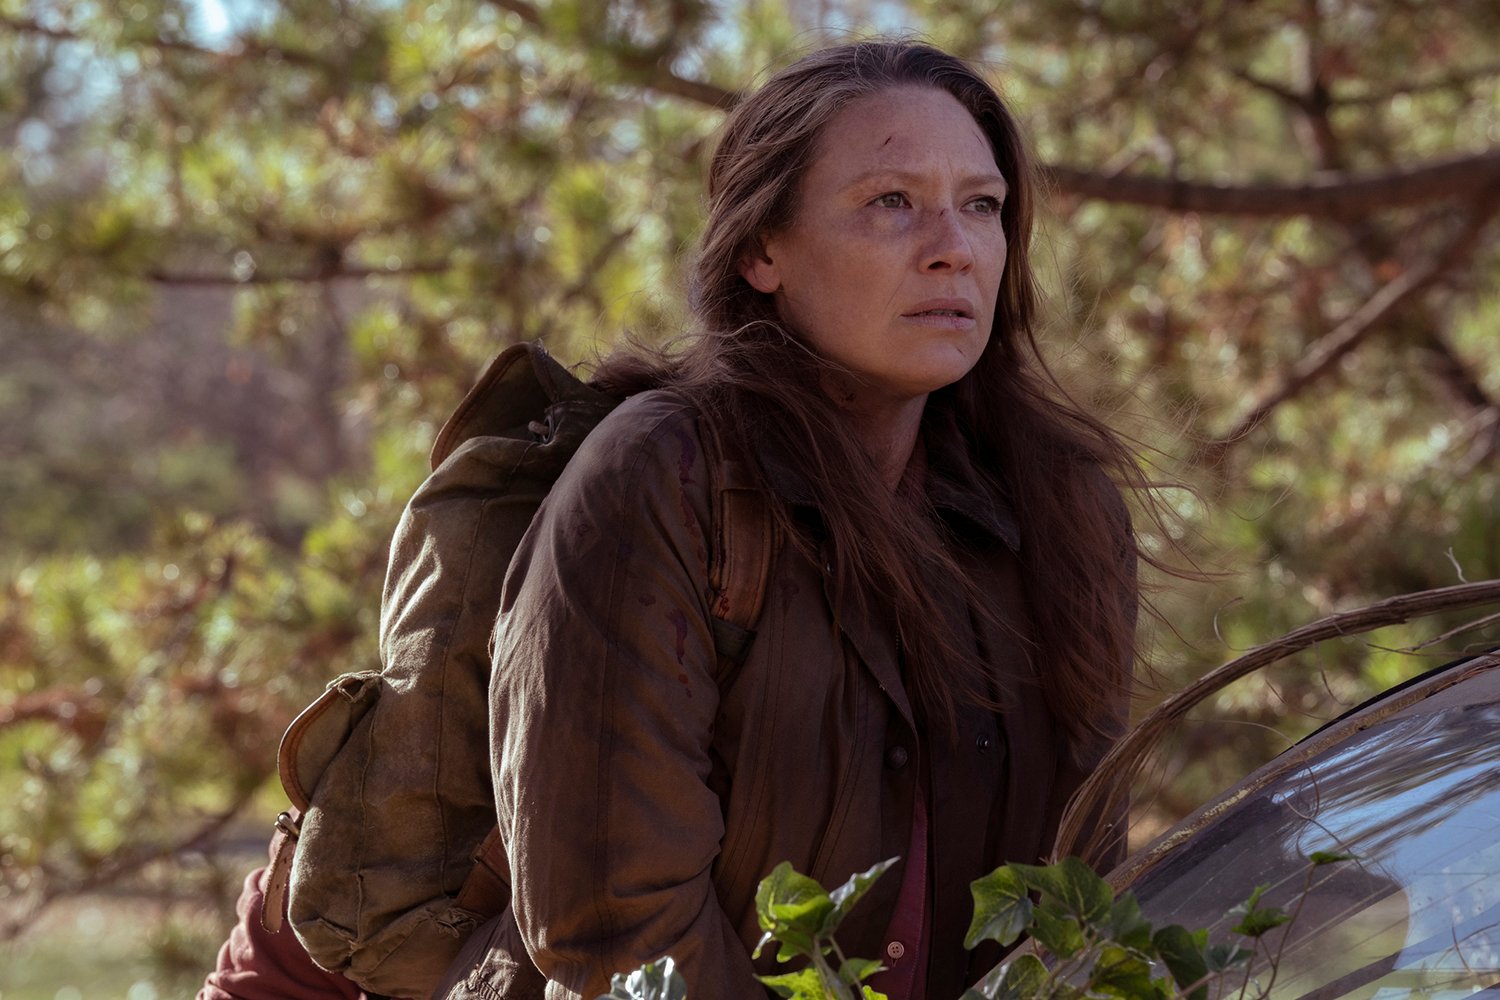 Anna Torv as Tess in The Last of Us Episode 2